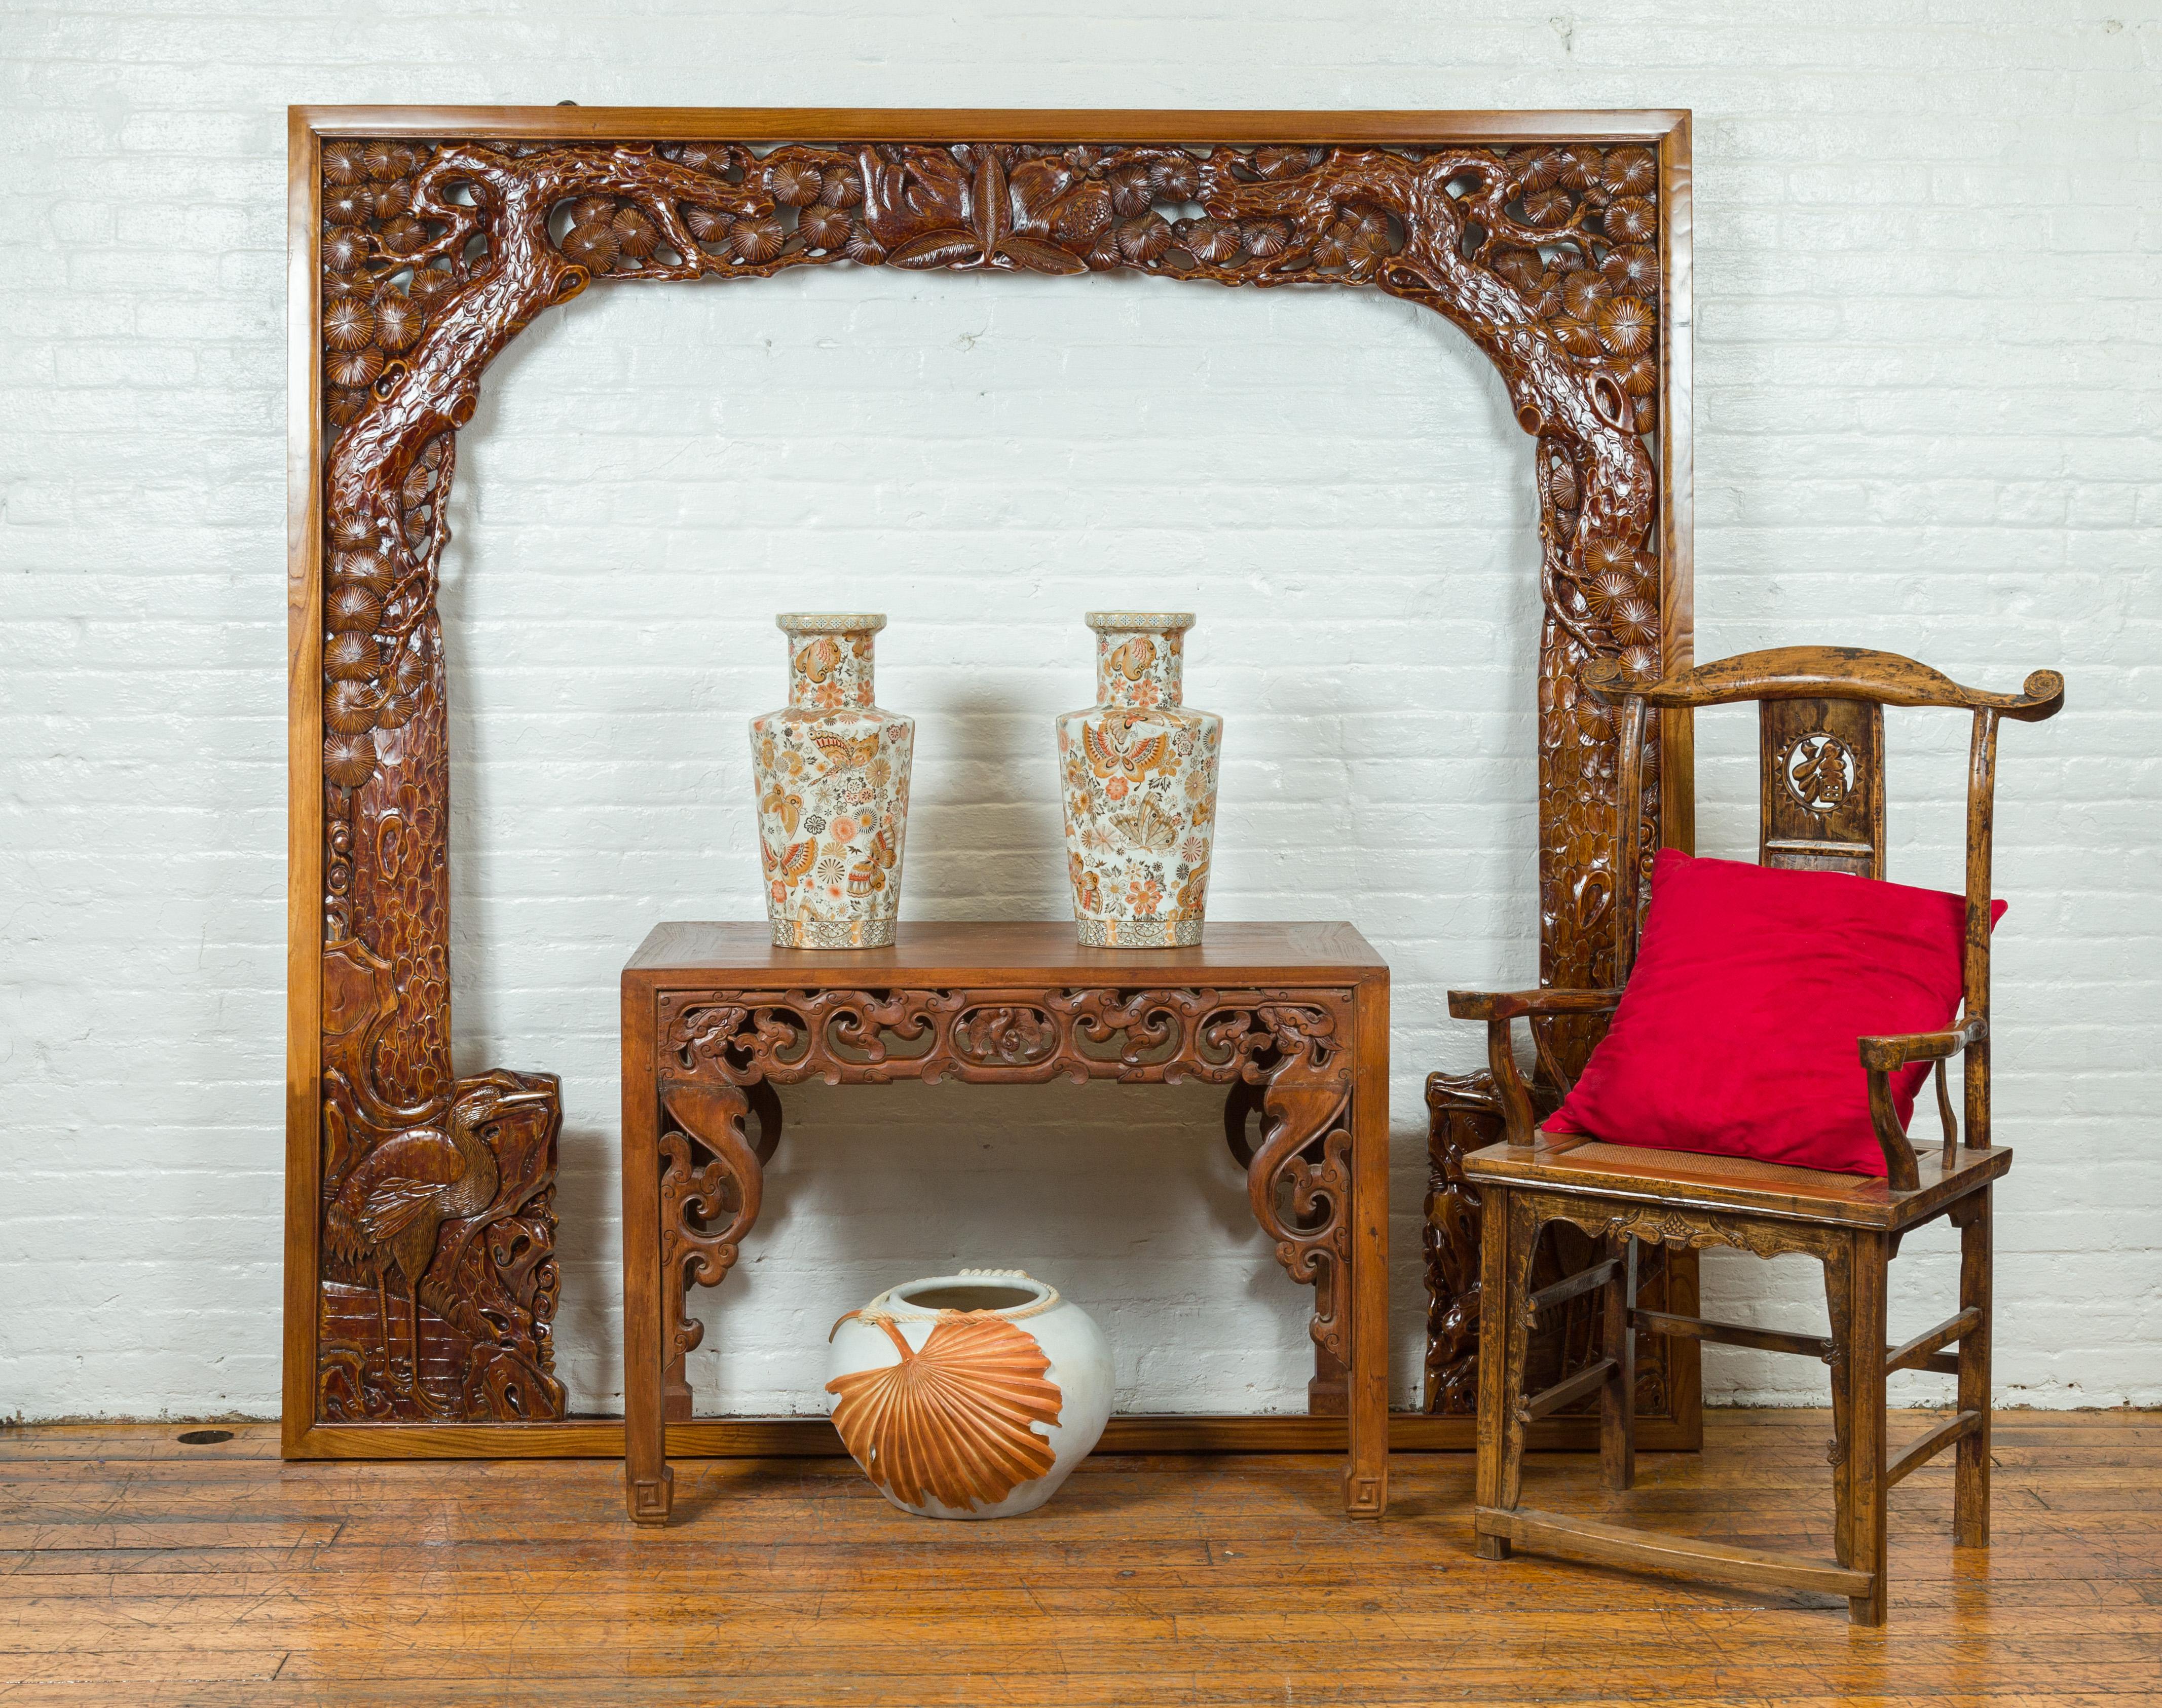 An oversized antique carved wooden frame with intricate details such as birds, flowers and tree limbs. Immerse yourself in the intricate beauty and grandeur of this oversized antique carved frame, a masterpiece of craftsmanship that captures the